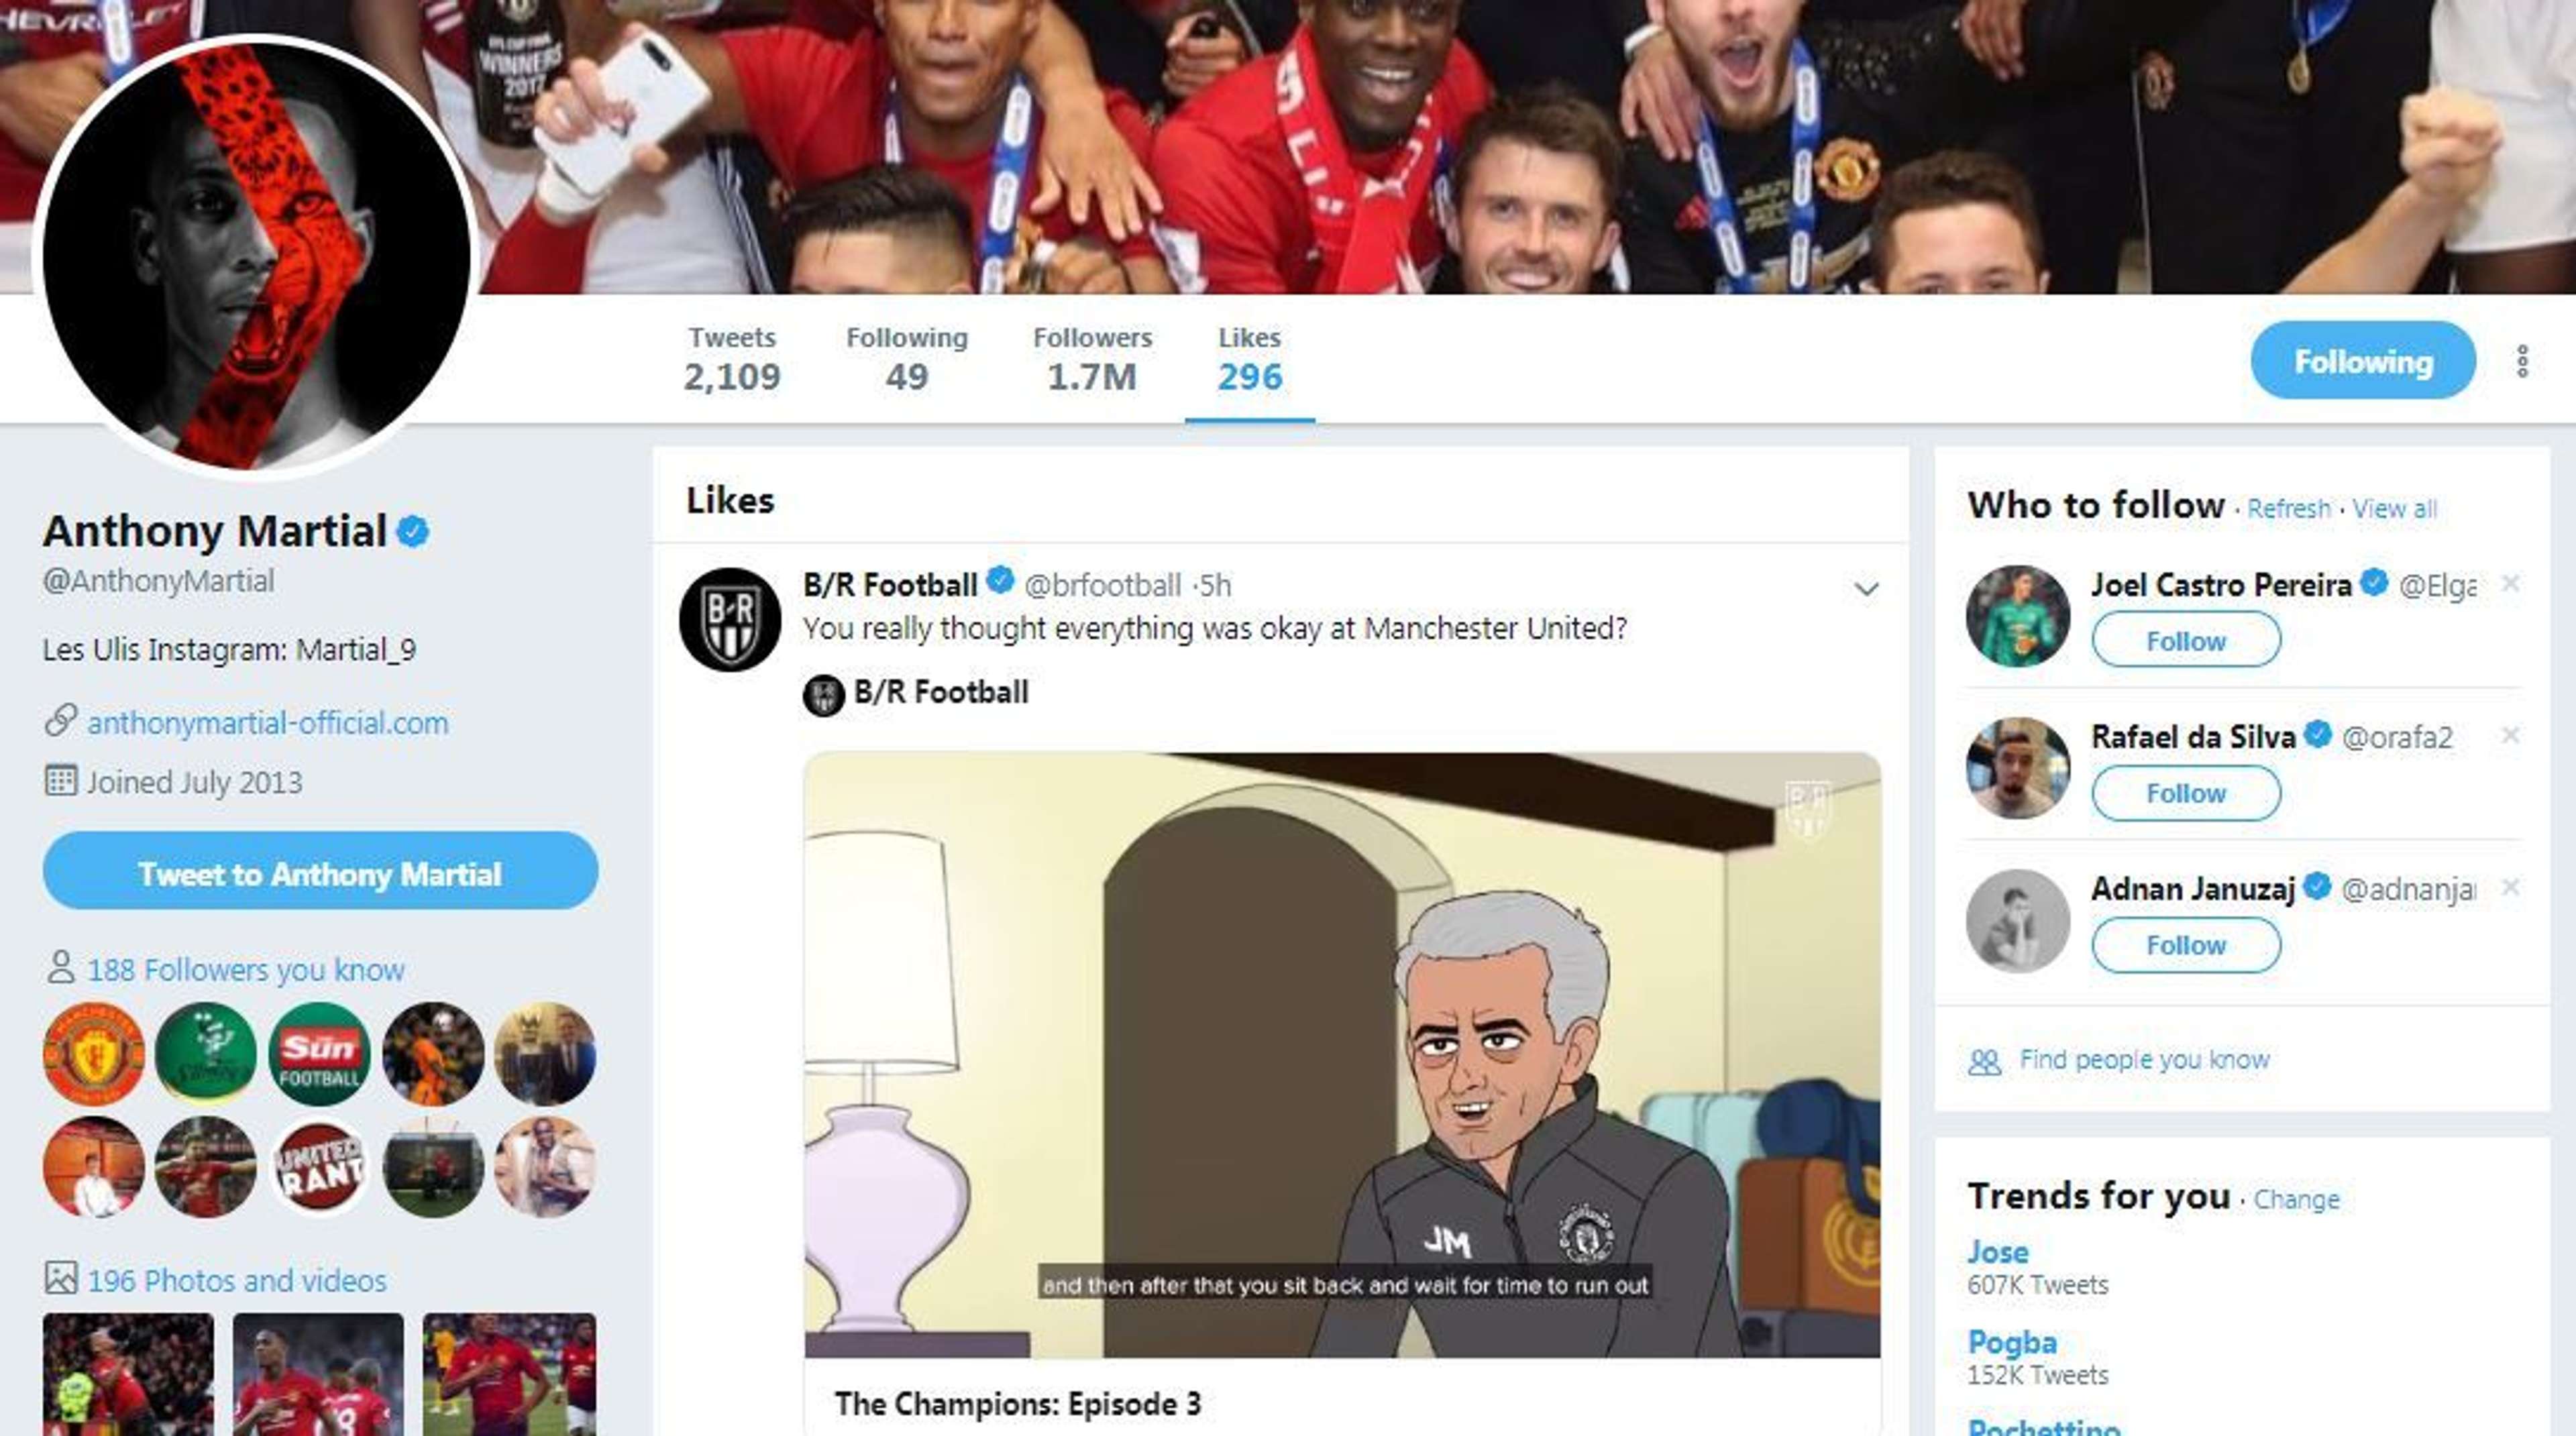 Anthony Martial's Twitter